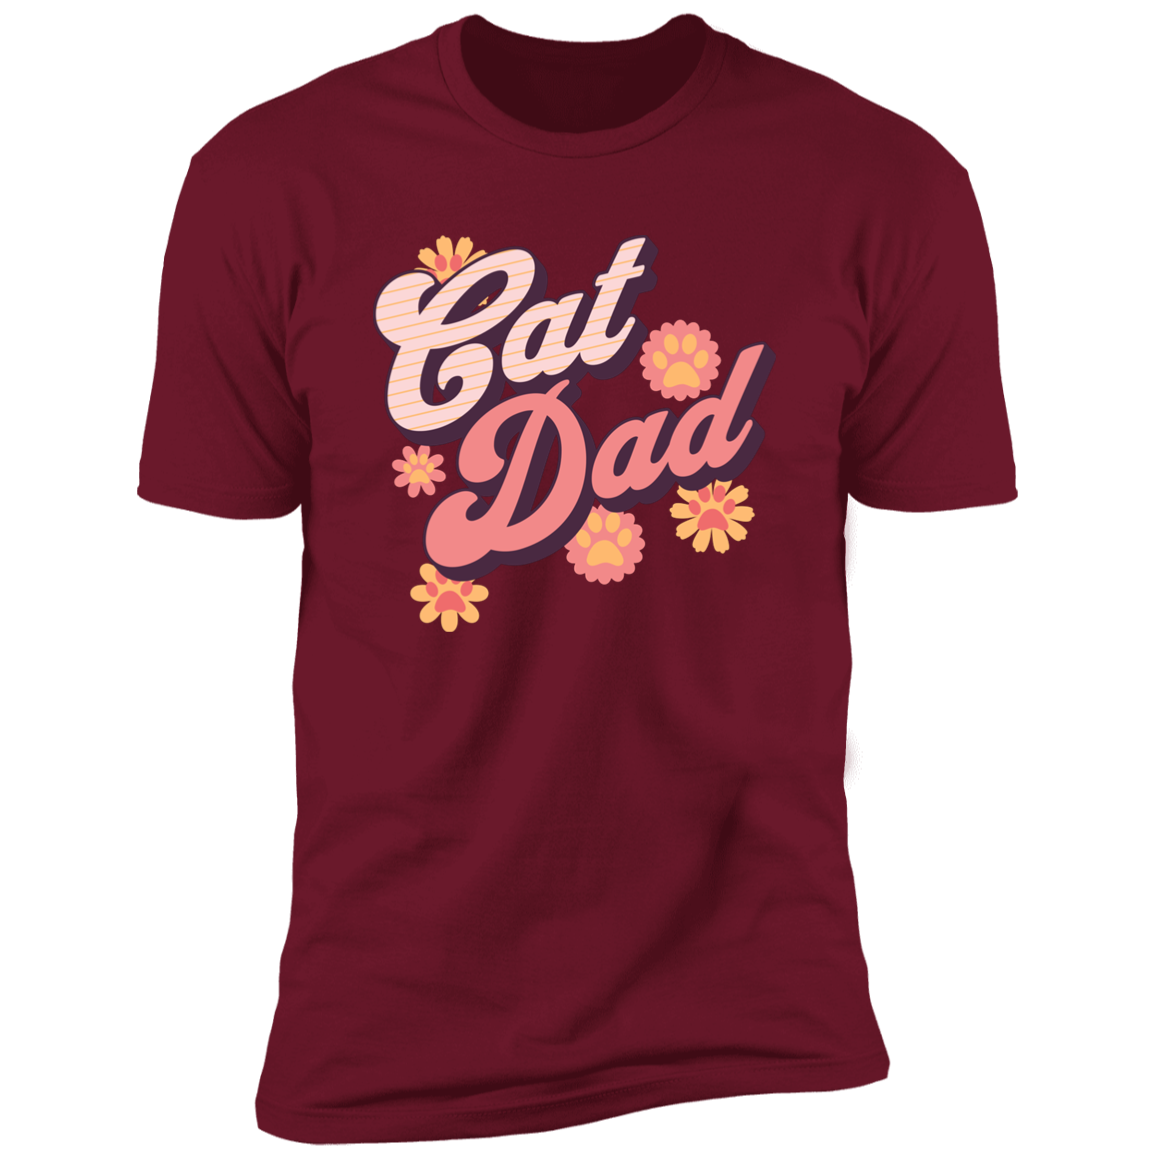 Cat Dad Retro T-shirt, Cat Dad Shirt for humans, in cardinal red